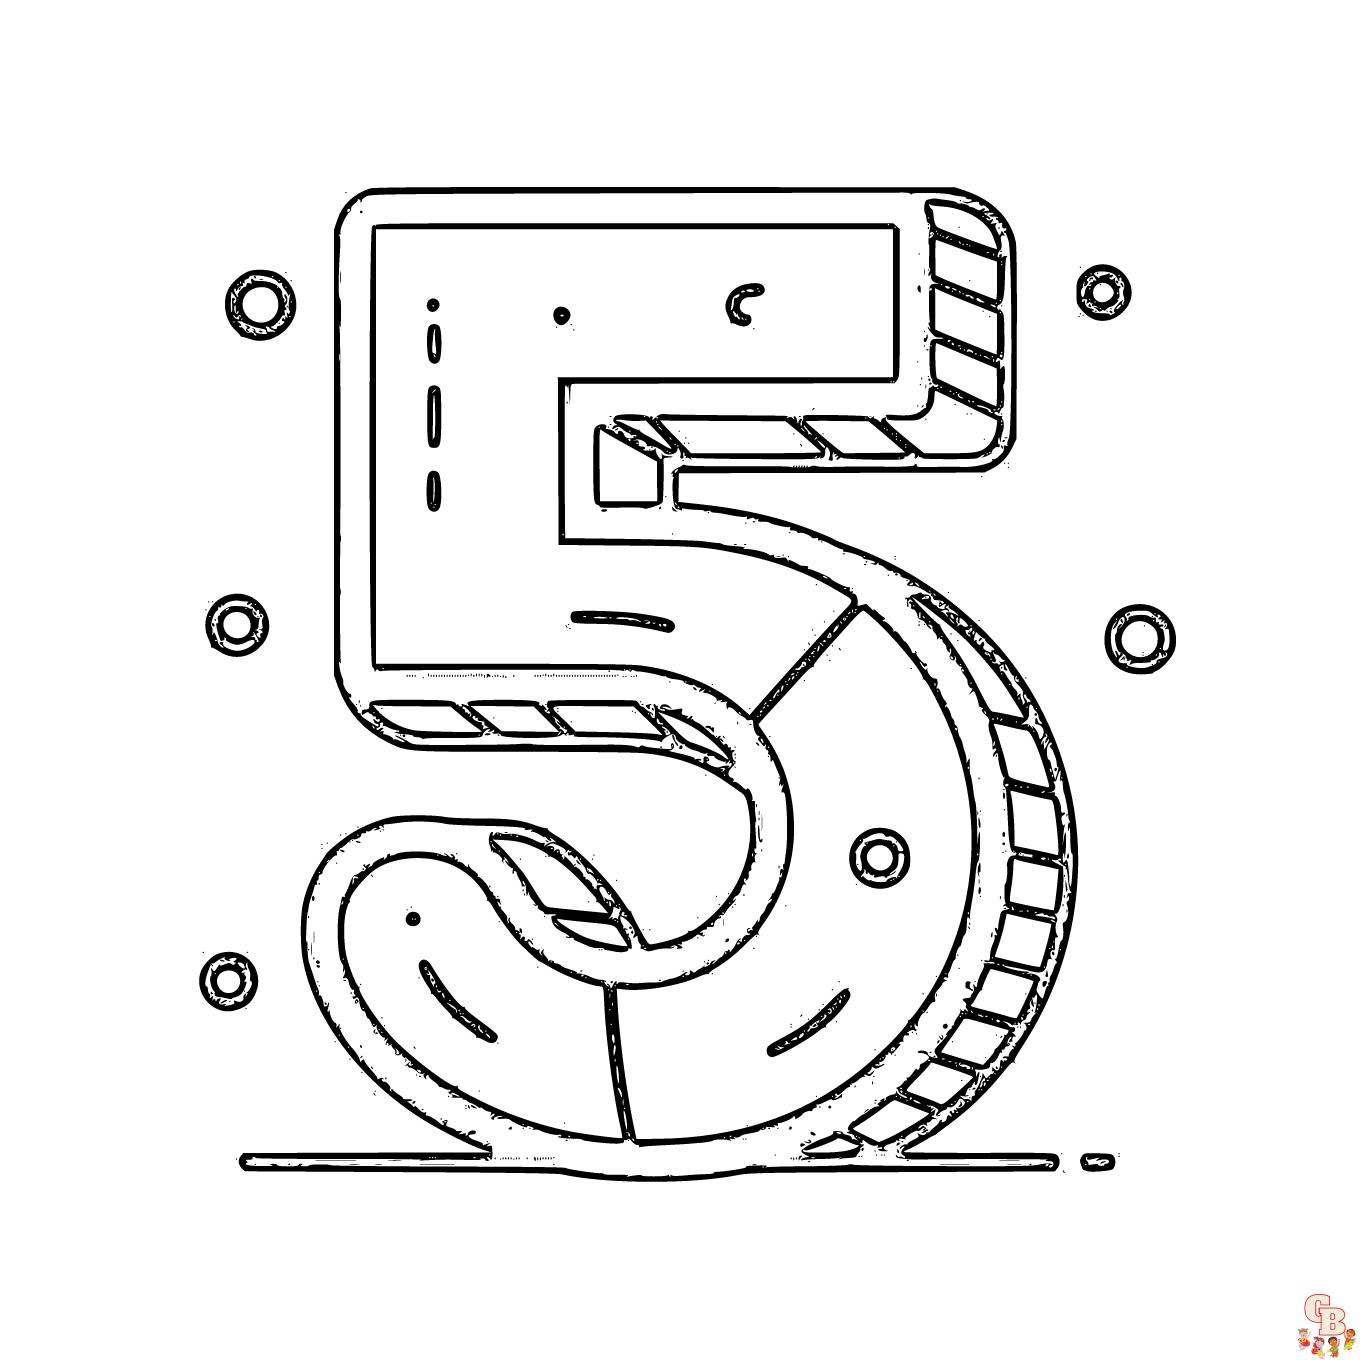 Printable number coloring pages free for kids and adults